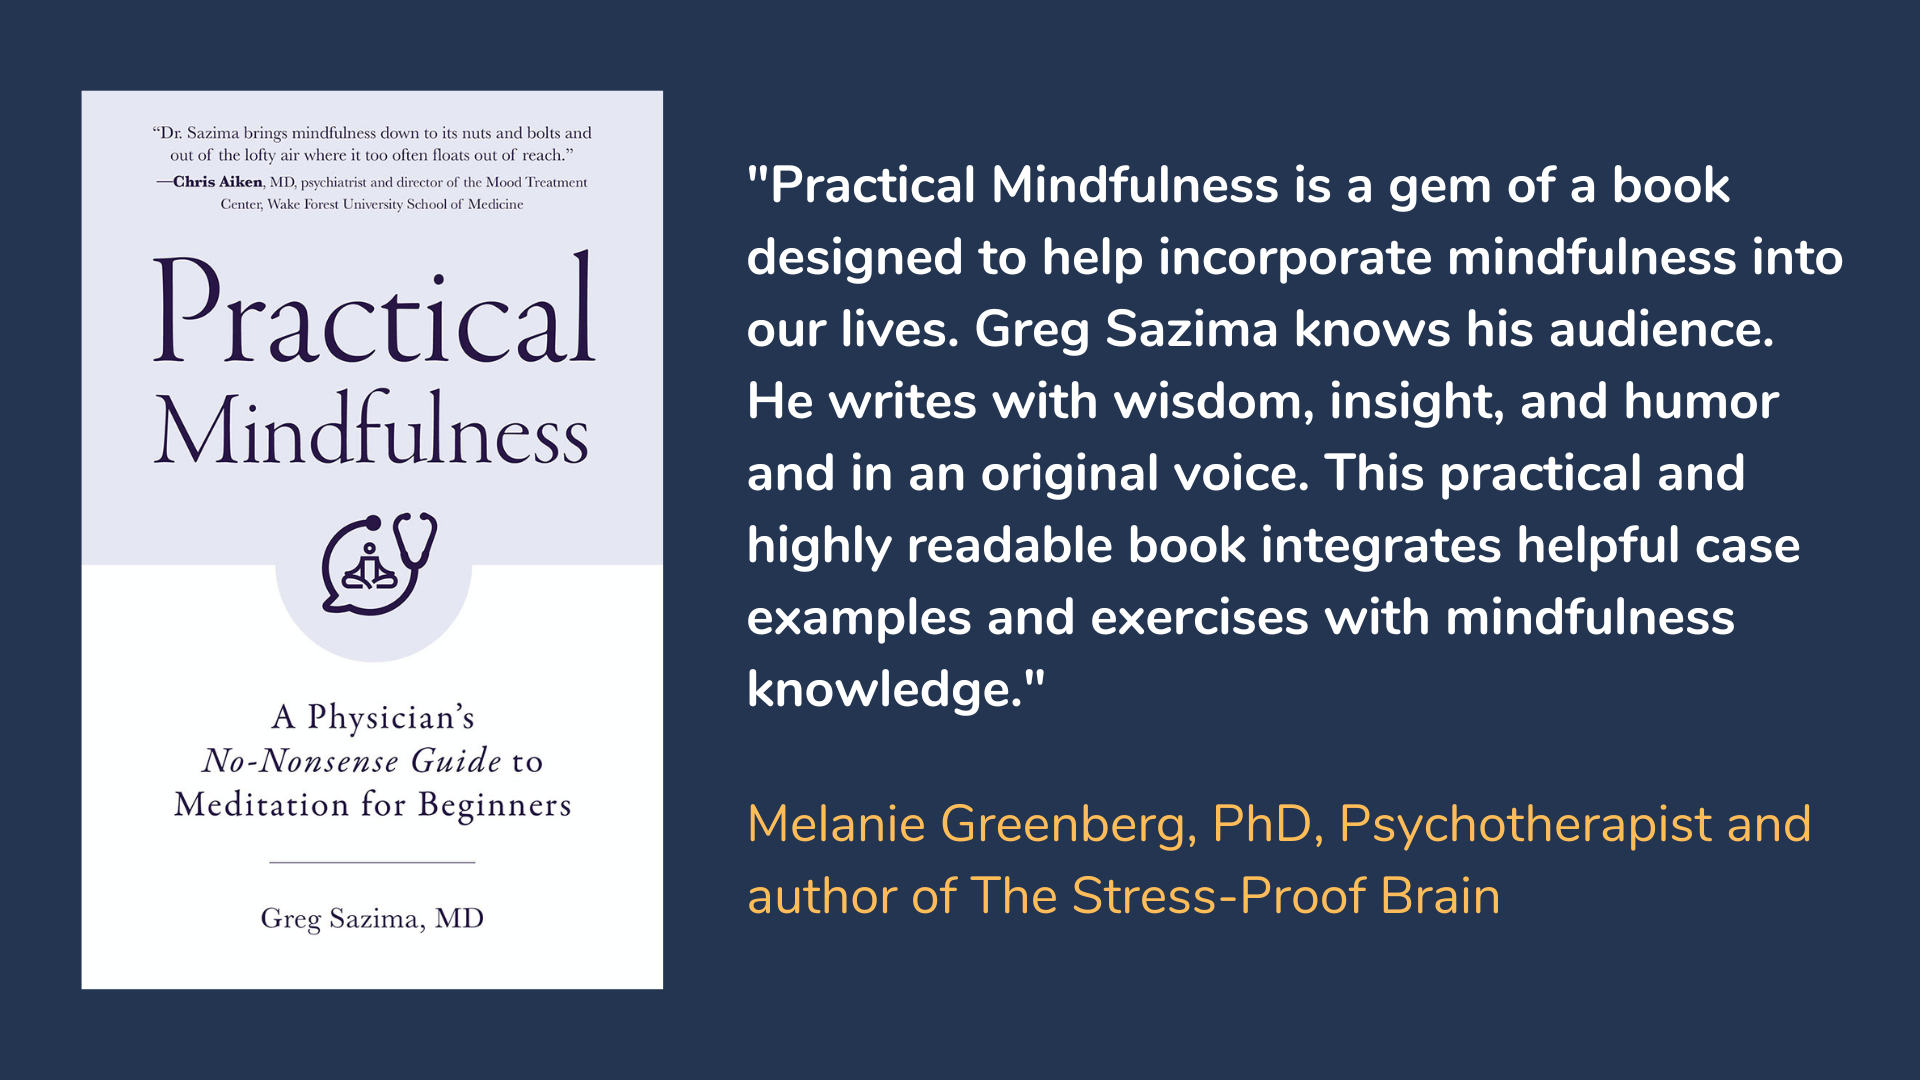 Practical Mindfulness: A Physician's No-Nonsense Guide to Meditation for Beginners, book cover and description